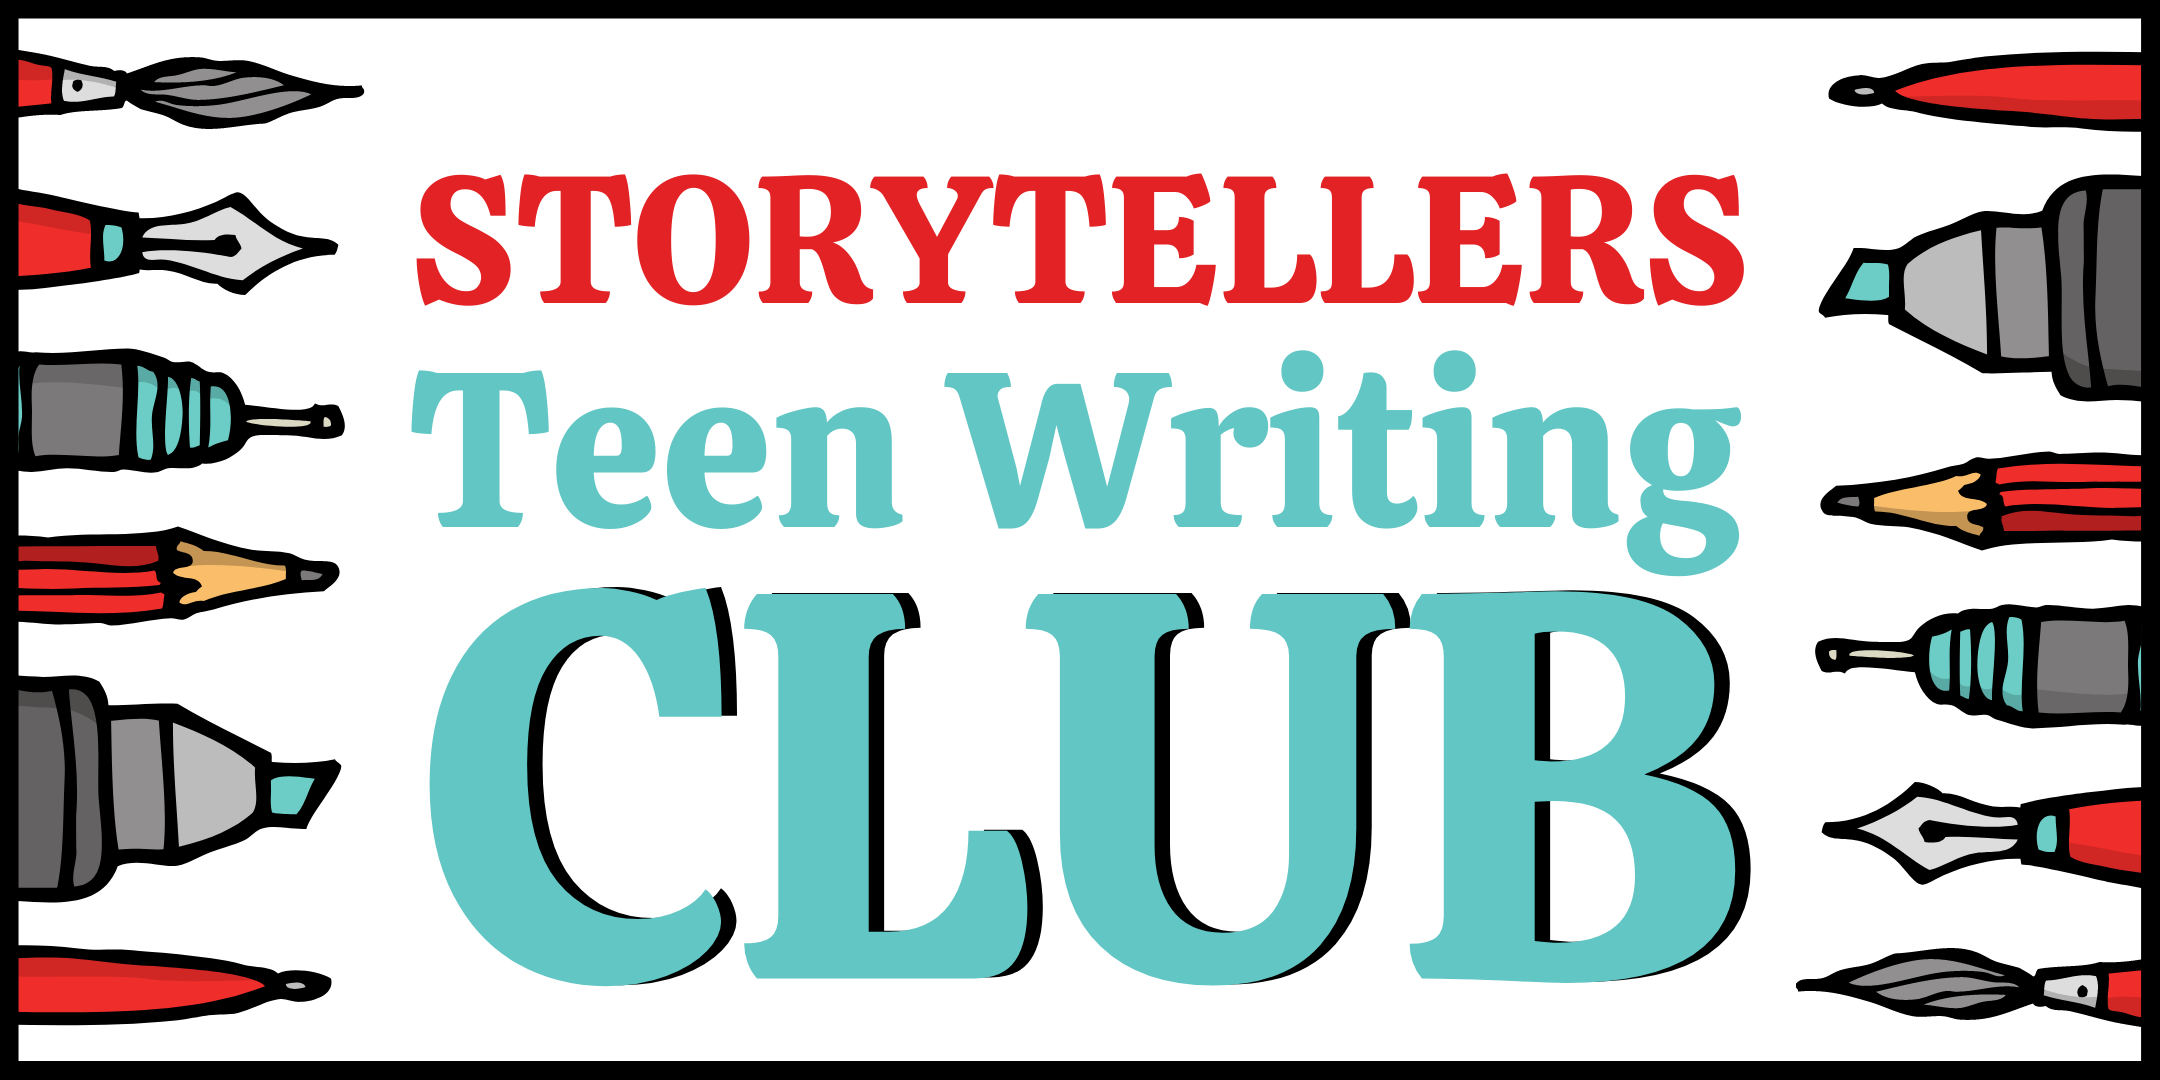 image of graphic pens and pencils on the left and right side with text in the center stating Storytellers Teen Writing Club in reds and teals